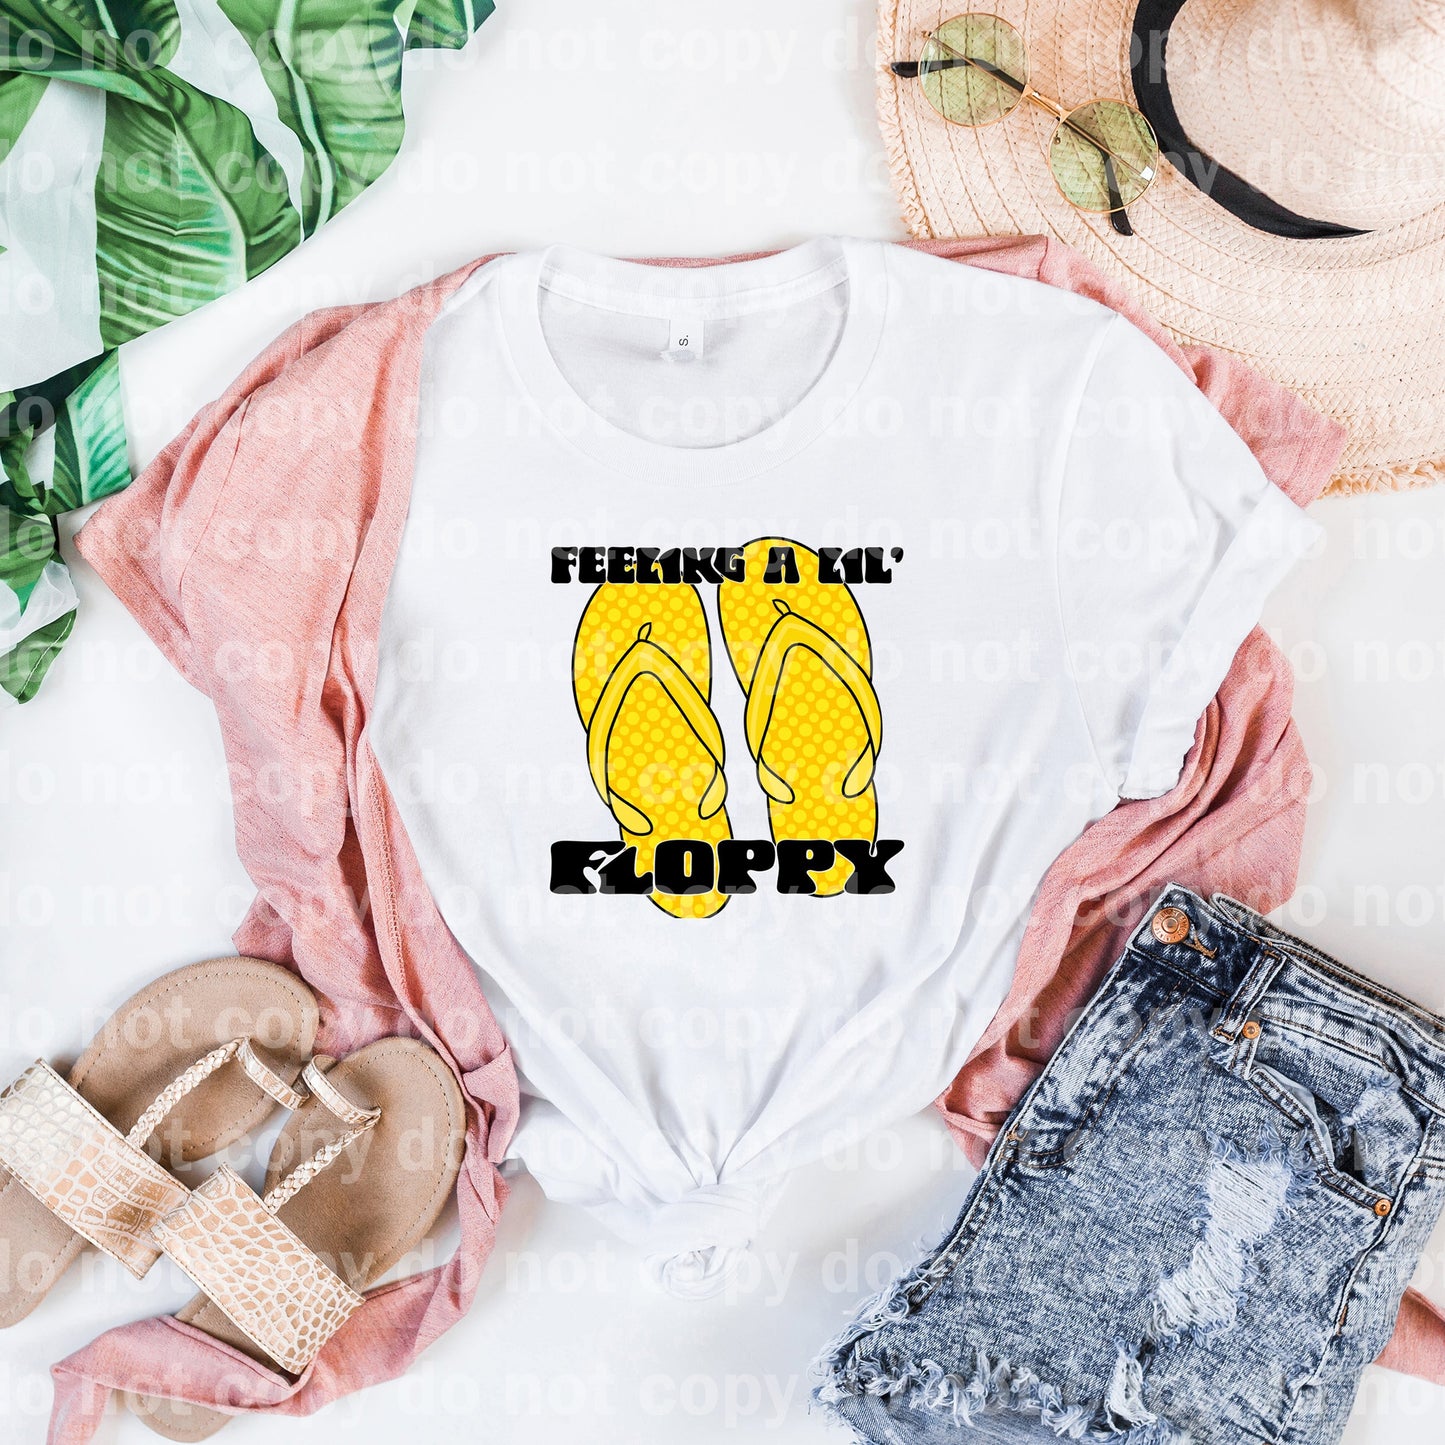 Feeling A Lil Floppy Yellow Slippers Black/White Font Dream Print or Sublimation Print